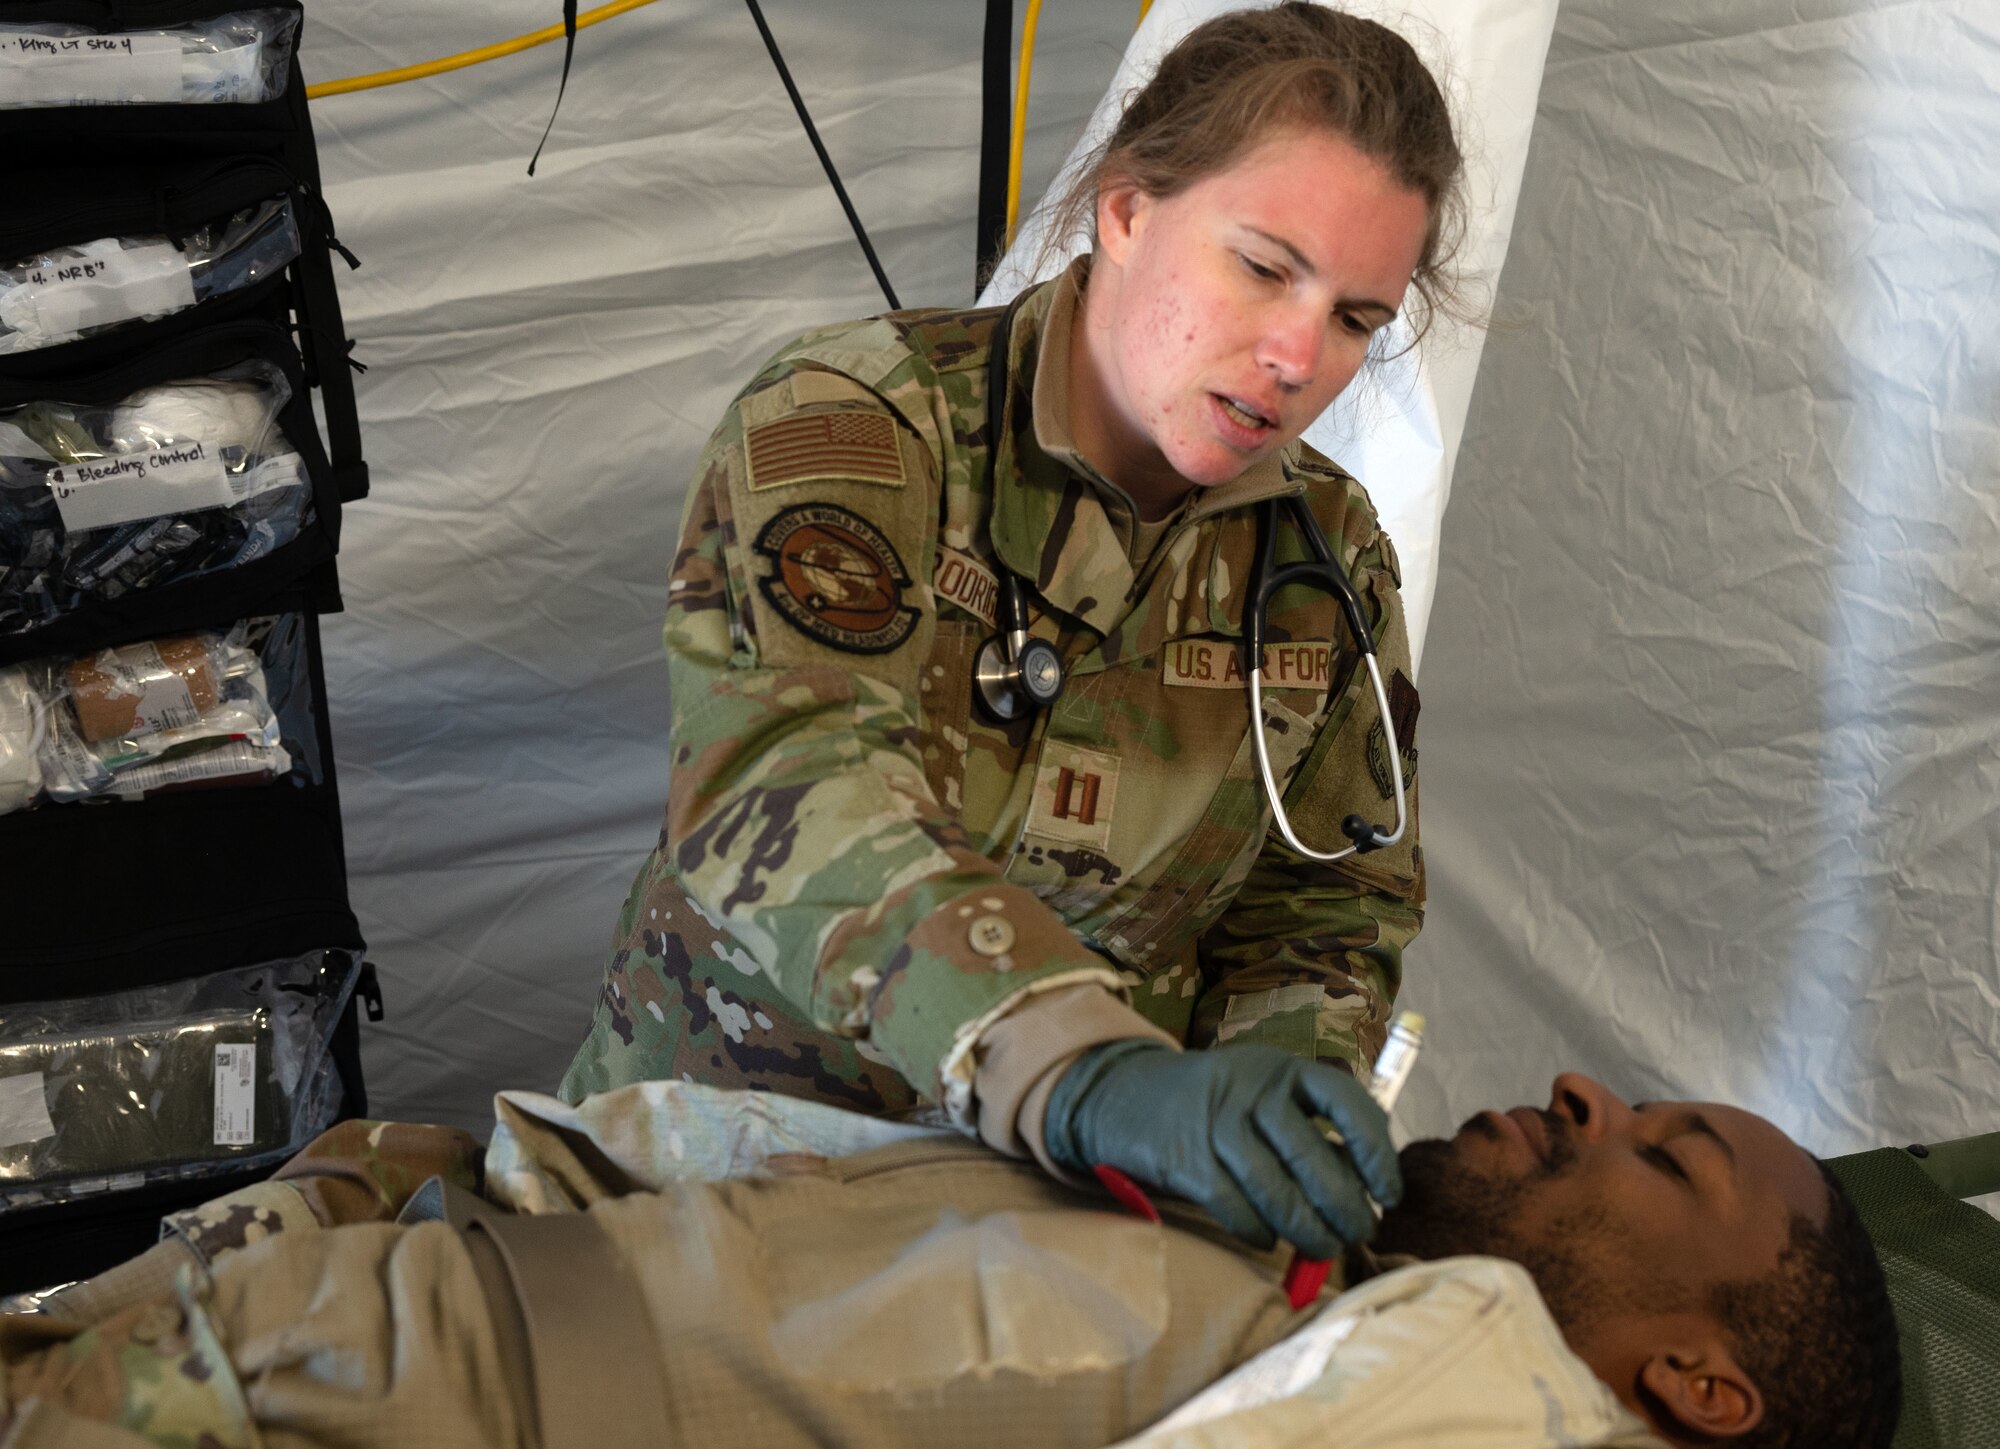 Capt. Karen Rodriguez, 4th Operational Medical Readiness Squadron flight doctor, triages a simulated patient as part of a mass casualty event during exercise Agile Cub 4 at Marine Corps Air Station Cherry Point, North Carolina, March 8, 2023. The exercise scenario allowed medics assigned to the 4th Medical Group to receive advanced combat medical training in a deployed environment to ensure they are ready for any incident. This agile combat employment exercise shifts the generation of airpower from large, centralized bases to networks of smaller, dispersed locations.